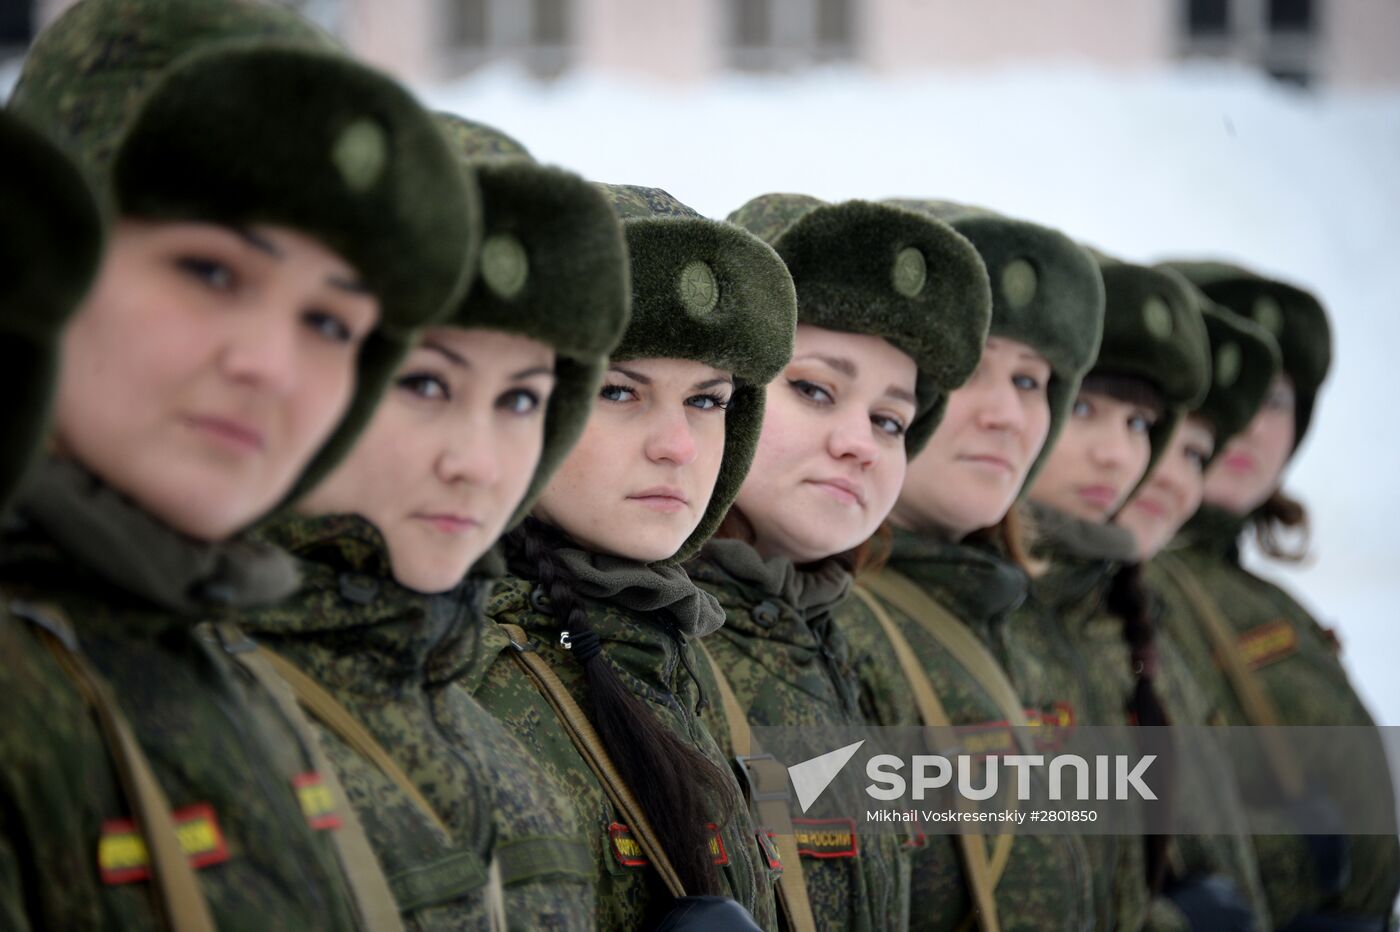 "Makeup under Camouflage" contest for female troops in Pereslavl-Zalessky